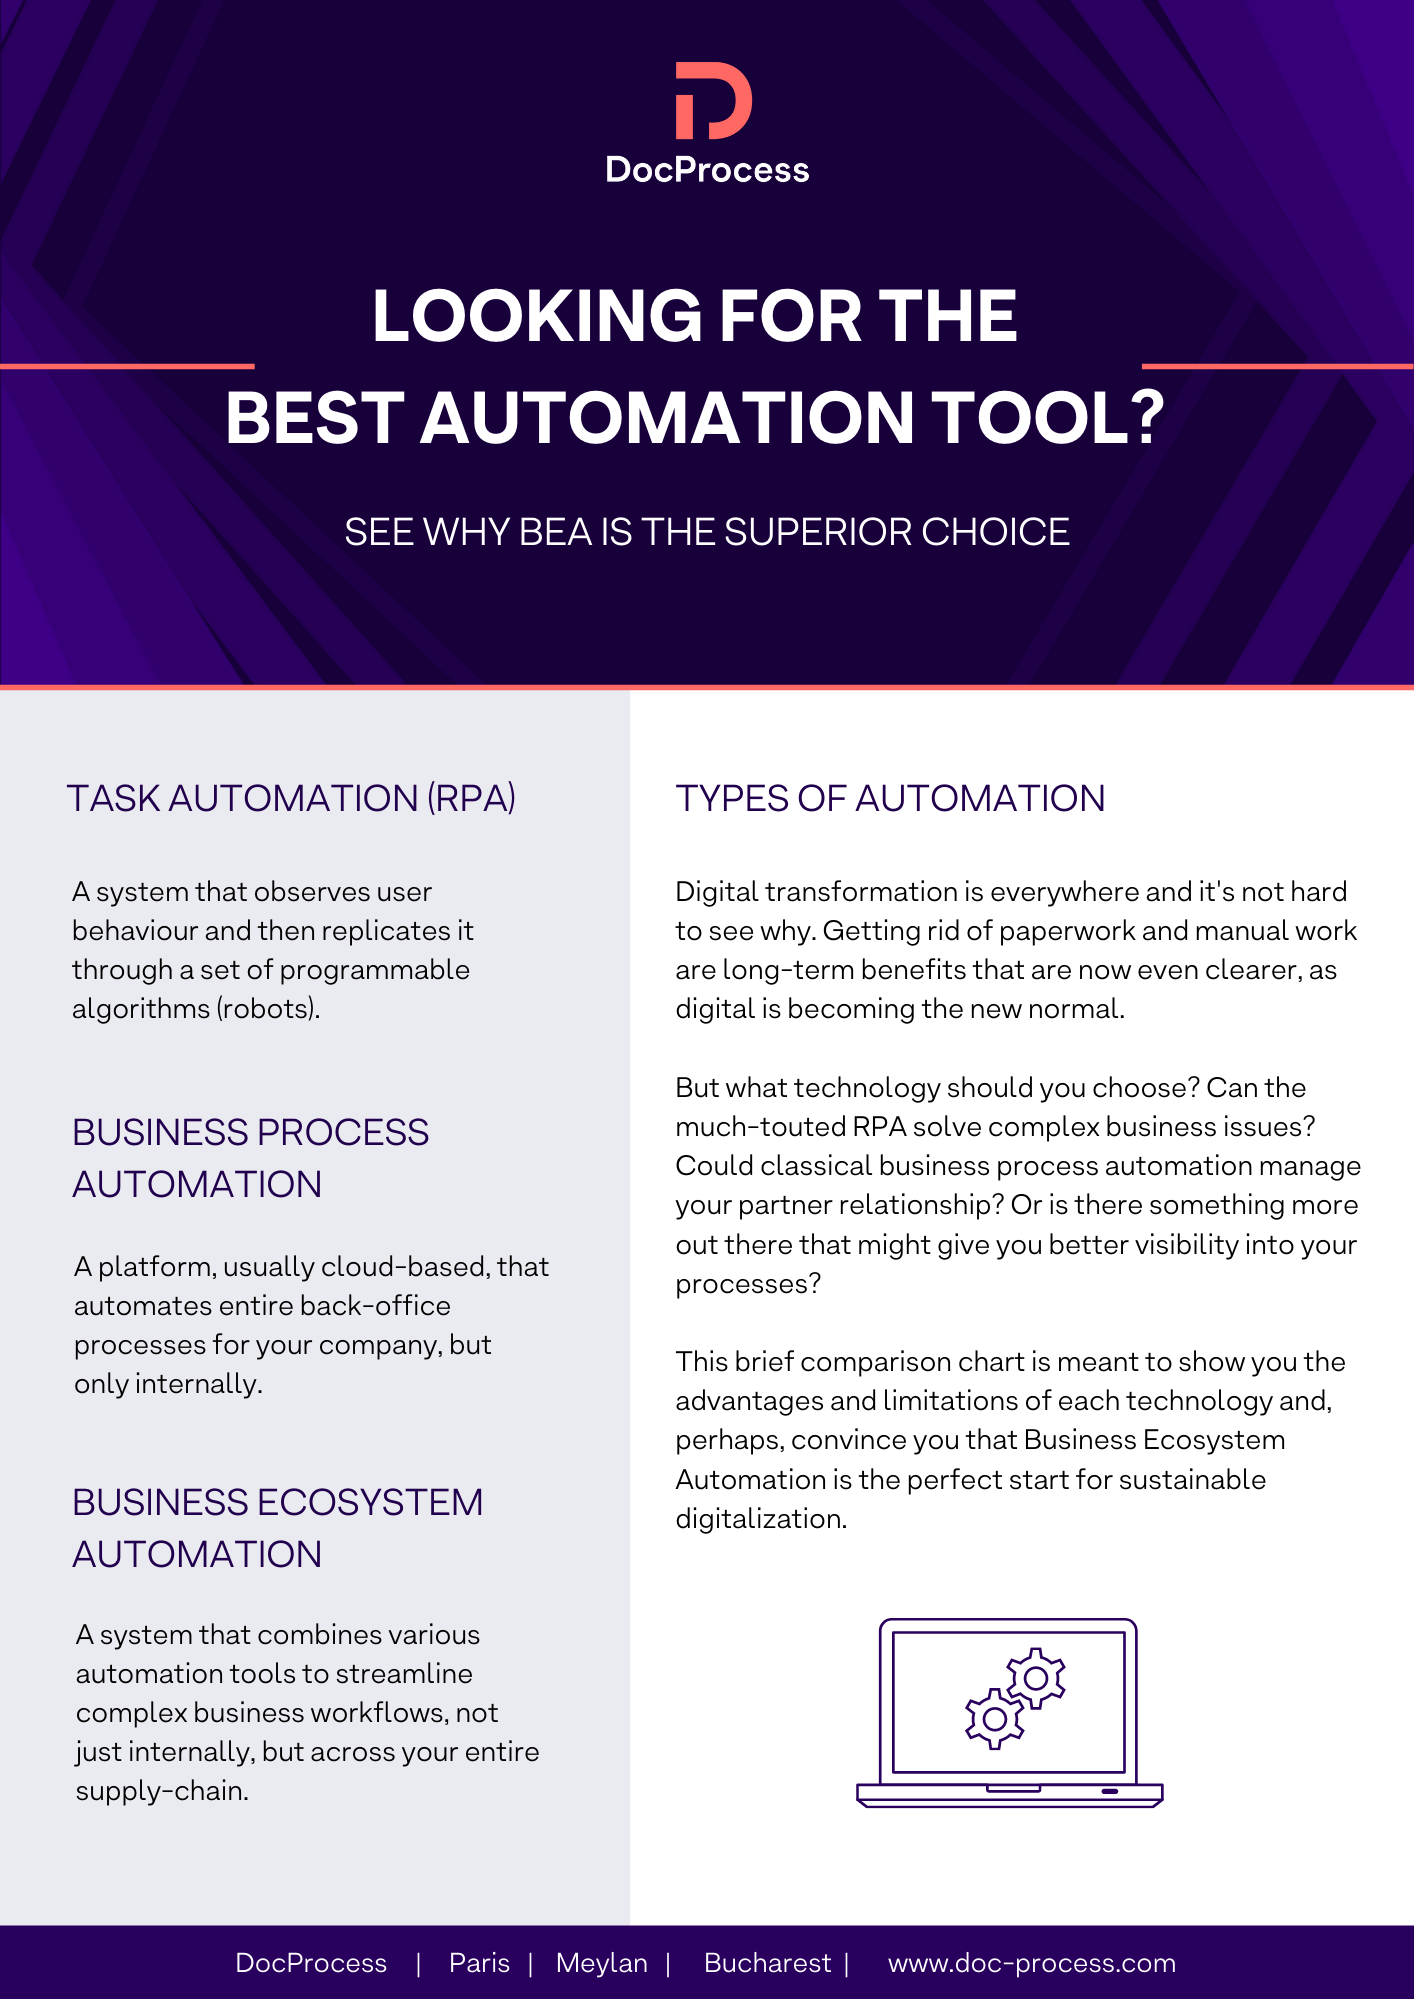 DocProcess - 3 Types of Automation